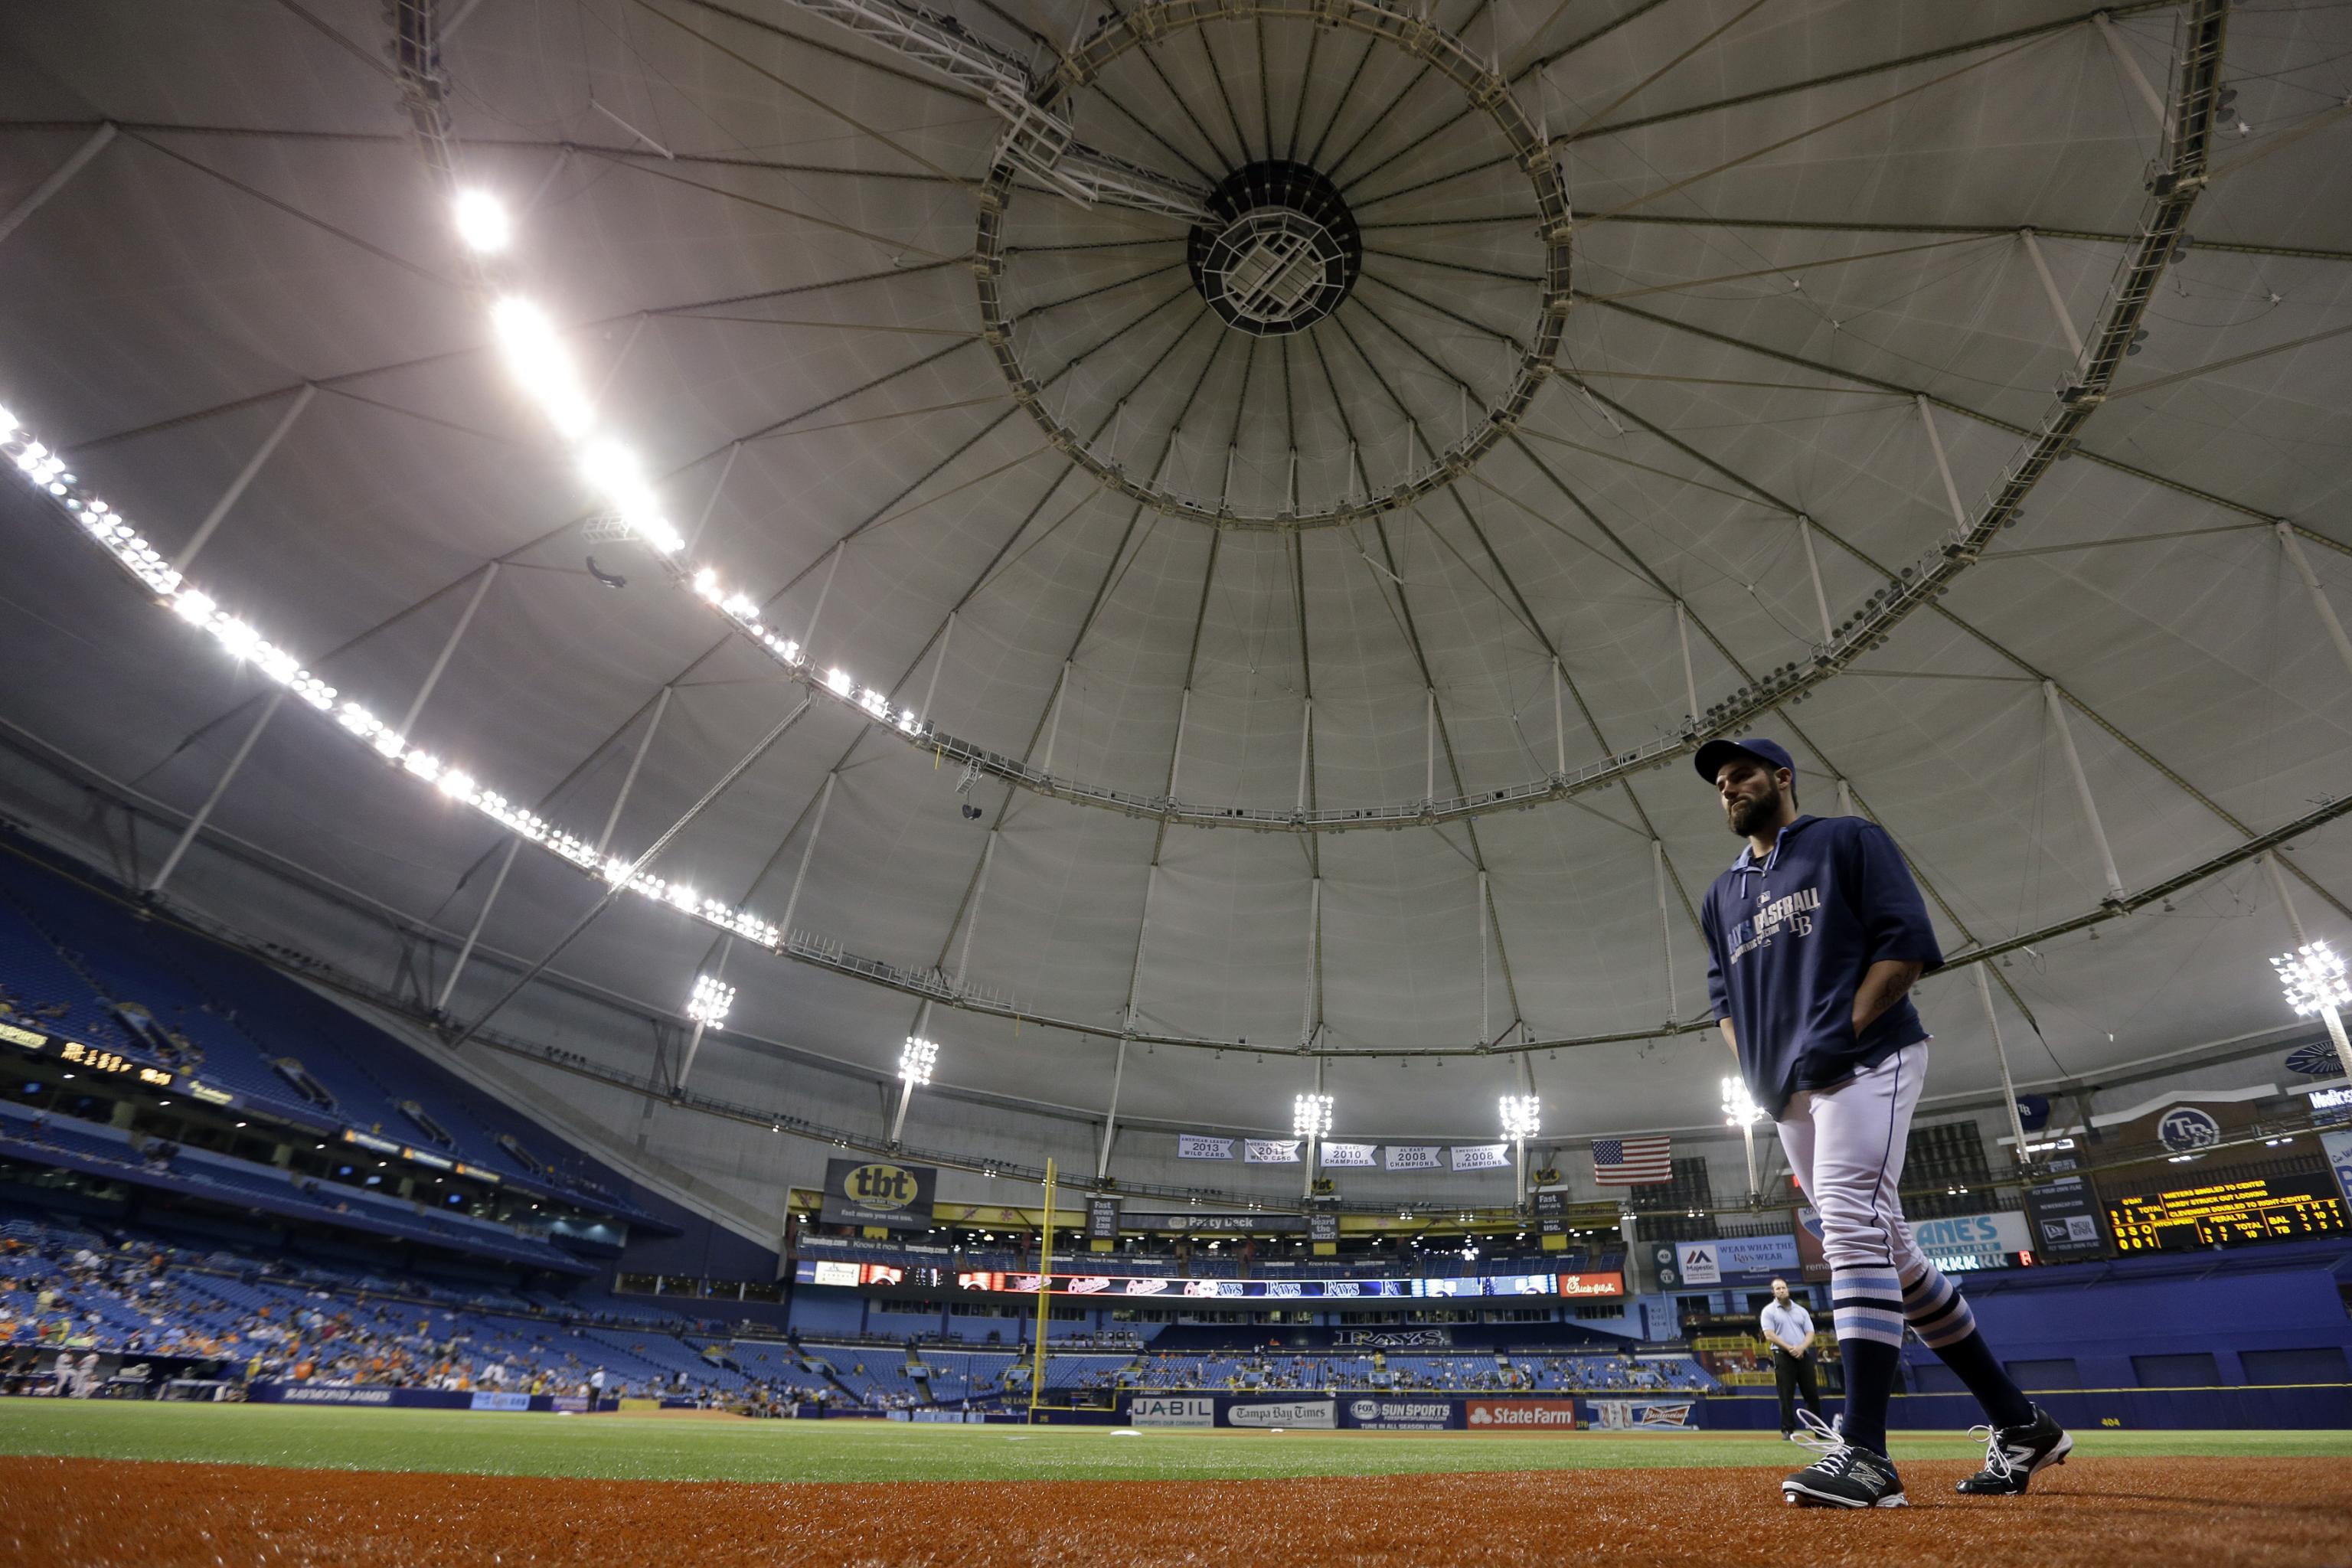 Tampa Bay Rays to Announce Agreement for New Stadium, per Report